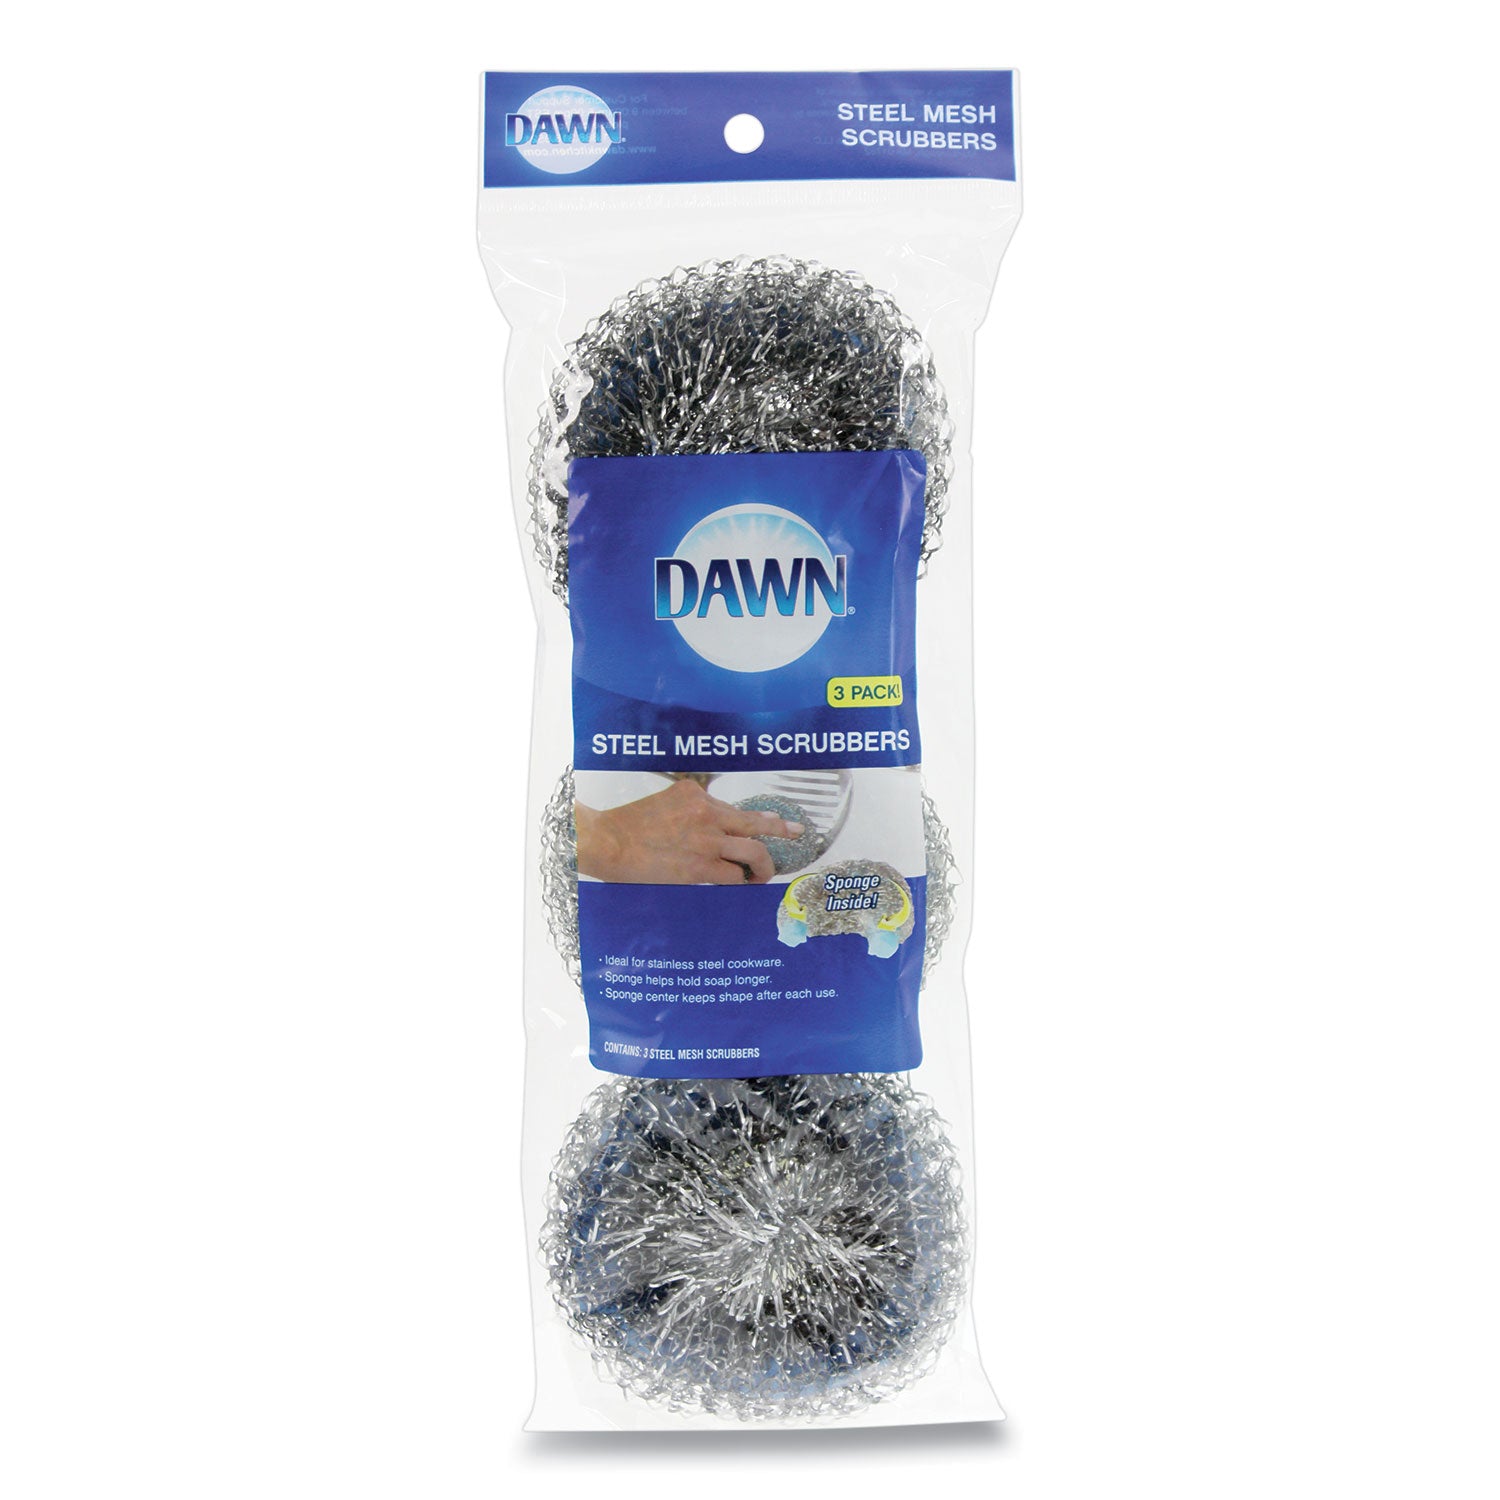 ultra-steel-scrubbers-gray-silver-3-pack_pgc437777 - 1